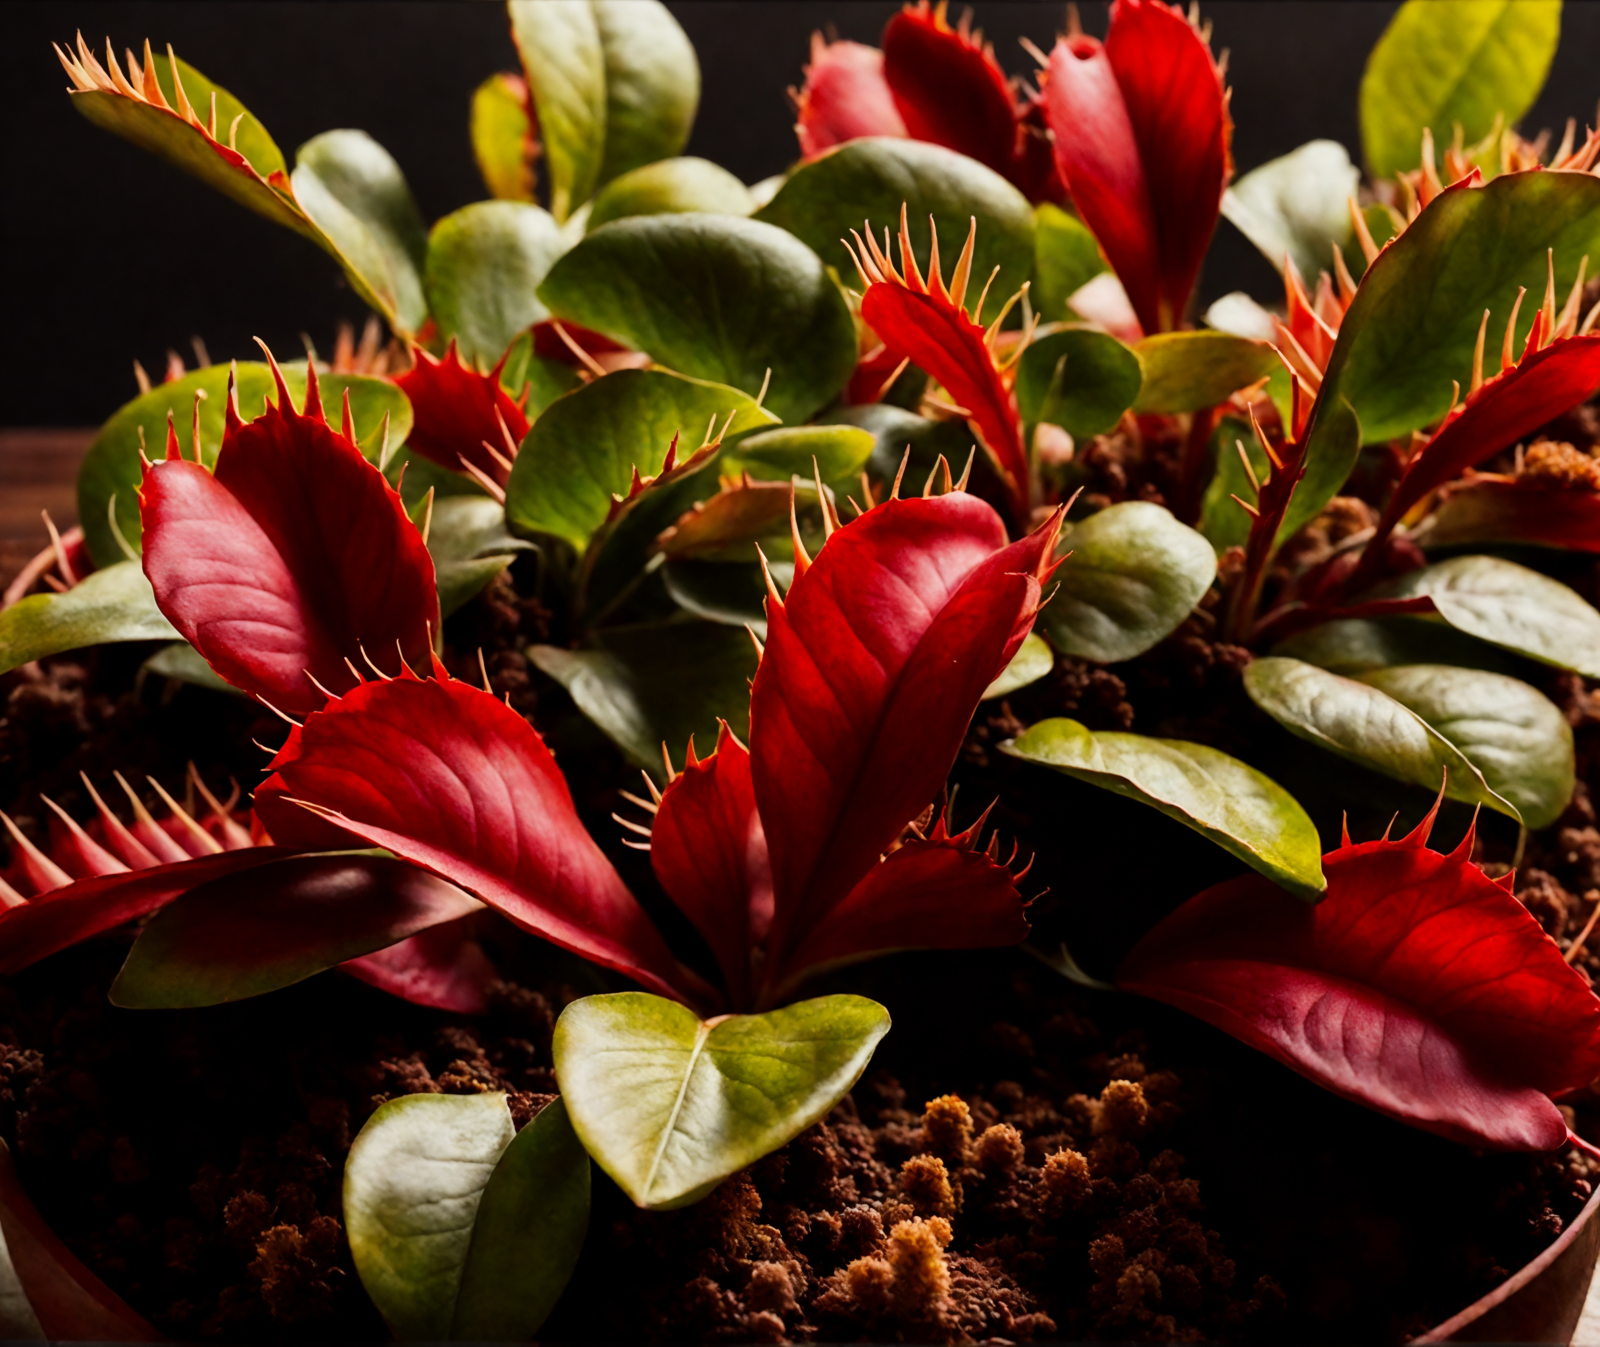 Dionaea muscipula (Venus flytrap) with red flowers in a bowl, clear indoor lighting, against a dark background.